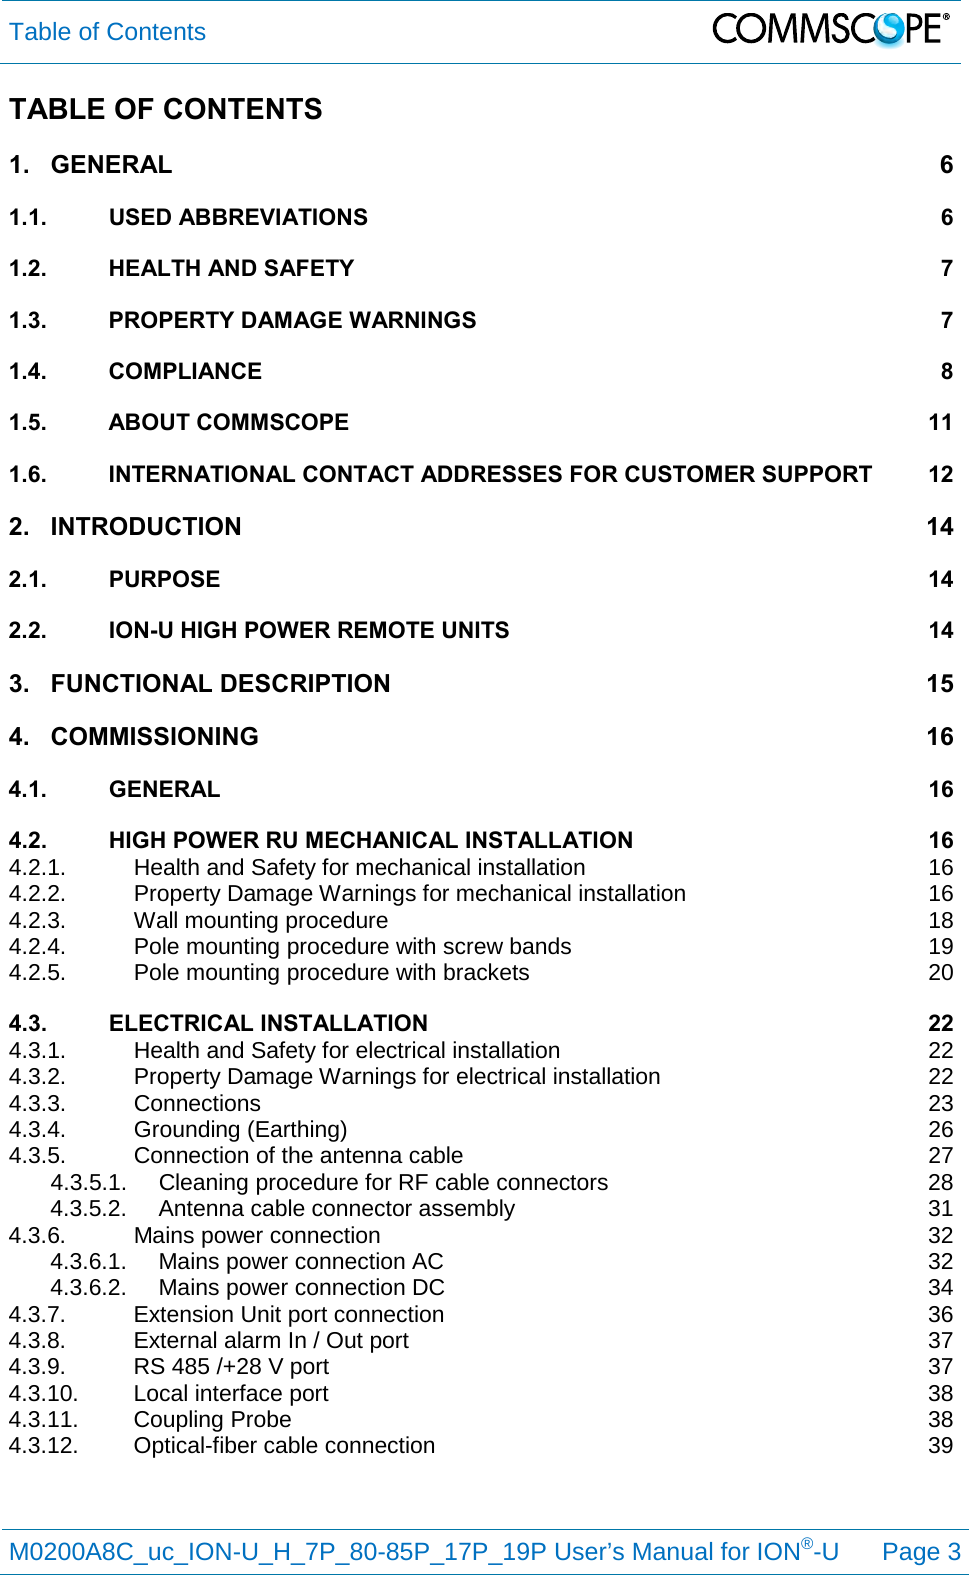 Table of Contents   M0200A8C_uc_ION-U_H_7P_80-85P_17P_19P User’s Manual for ION®-U  Page 3  TABLE OF CONTENTS 1. GENERAL  6 1.1. USED ABBREVIATIONS  6 1.2. HEALTH AND SAFETY  7 1.3. PROPERTY DAMAGE WARNINGS  7 1.4. COMPLIANCE  8 1.5. ABOUT COMMSCOPE 11 1.6. INTERNATIONAL CONTACT ADDRESSES FOR CUSTOMER SUPPORT 12 2. INTRODUCTION 14 2.1. PURPOSE 14 2.2. ION-U HIGH POWER REMOTE UNITS 14 3. FUNCTIONAL DESCRIPTION 15 4. COMMISSIONING 16 4.1. GENERAL 16 4.2. HIGH POWER RU MECHANICAL INSTALLATION 16 4.2.1. Health and Safety for mechanical installation 16 4.2.2. Property Damage Warnings for mechanical installation 16 4.2.3. Wall mounting procedure 18 4.2.4. Pole mounting procedure with screw bands 19 4.2.5. Pole mounting procedure with brackets 20 4.3. ELECTRICAL INSTALLATION 22 4.3.1. Health and Safety for electrical installation 22 4.3.2. Property Damage Warnings for electrical installation 22 4.3.3. Connections 23 4.3.4. Grounding (Earthing) 26 4.3.5. Connection of the antenna cable 27 4.3.5.1. Cleaning procedure for RF cable connectors 28 4.3.5.2. Antenna cable connector assembly 31 4.3.6. Mains power connection 32 4.3.6.1. Mains power connection AC 32 4.3.6.2. Mains power connection DC 34 4.3.7. Extension Unit port connection 36 4.3.8. External alarm In / Out port 37 4.3.9. RS 485 /+28 V port 37 4.3.10. Local interface port 38 4.3.11. Coupling Probe 38 4.3.12. Optical-fiber cable connection 39   